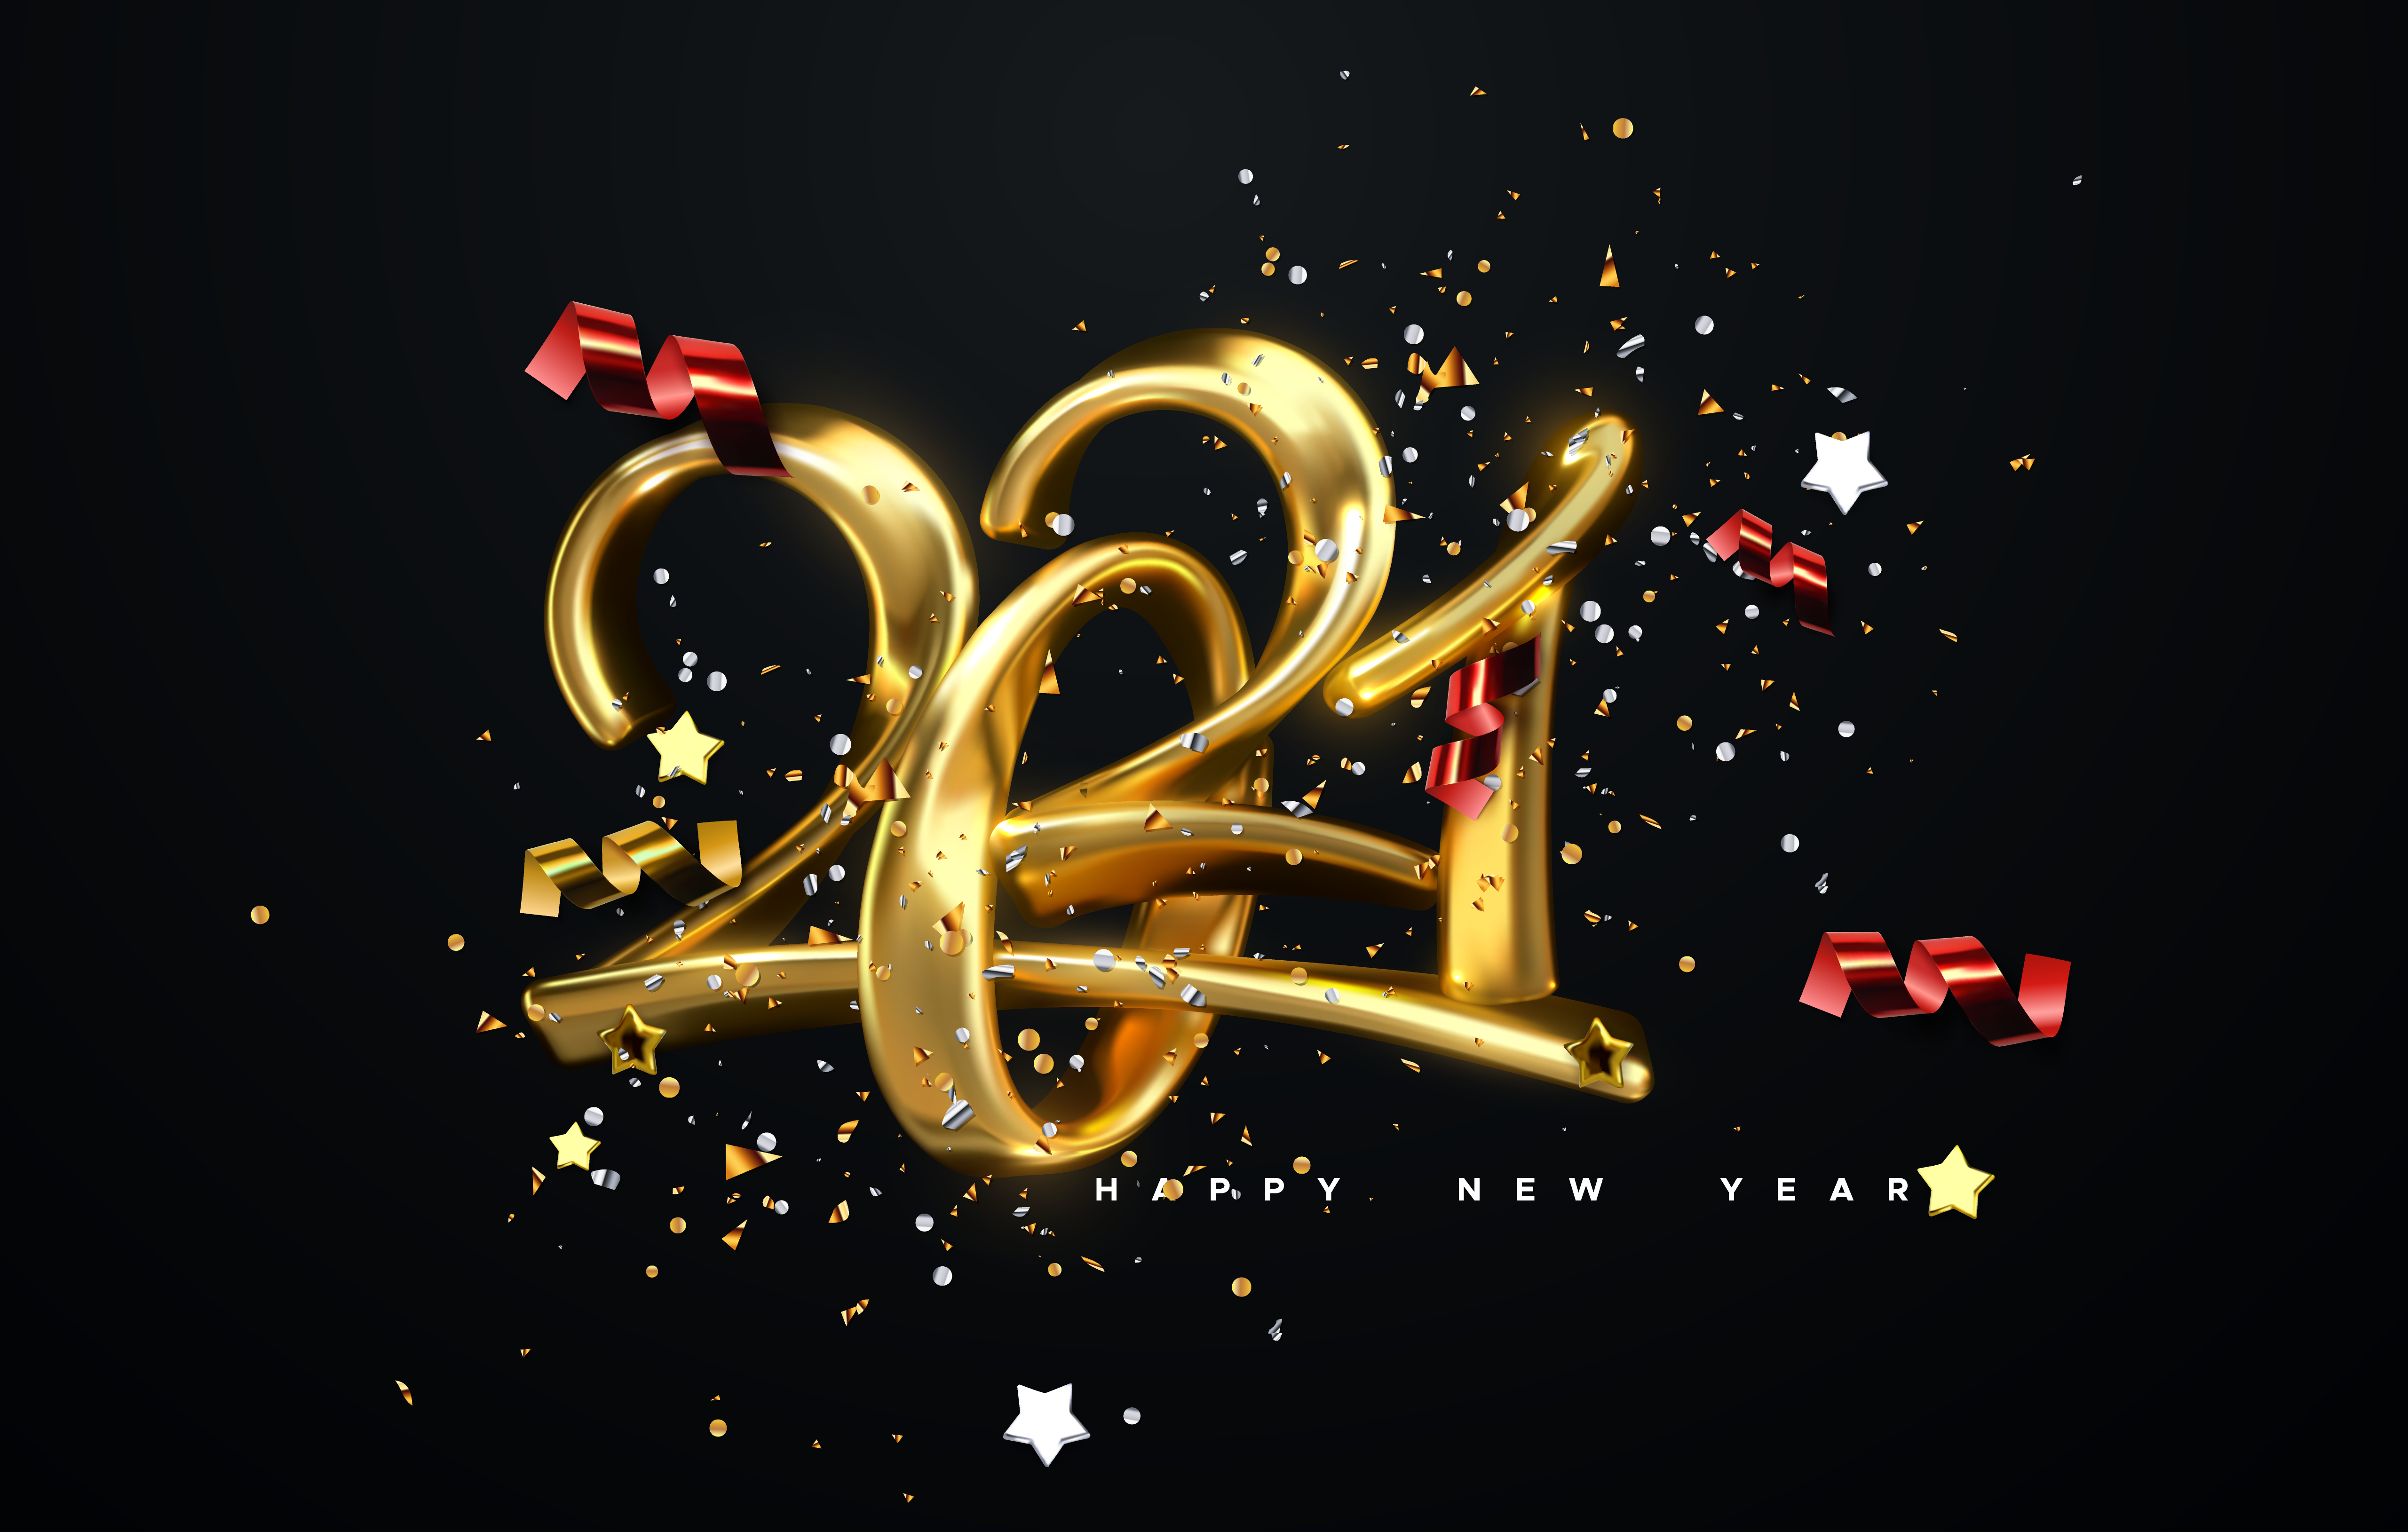 New Year 4K Wallpaper, Golden Letters, Calligraphic, Ribbons, Happy New Year, Party Confetti, Celebrations New Year